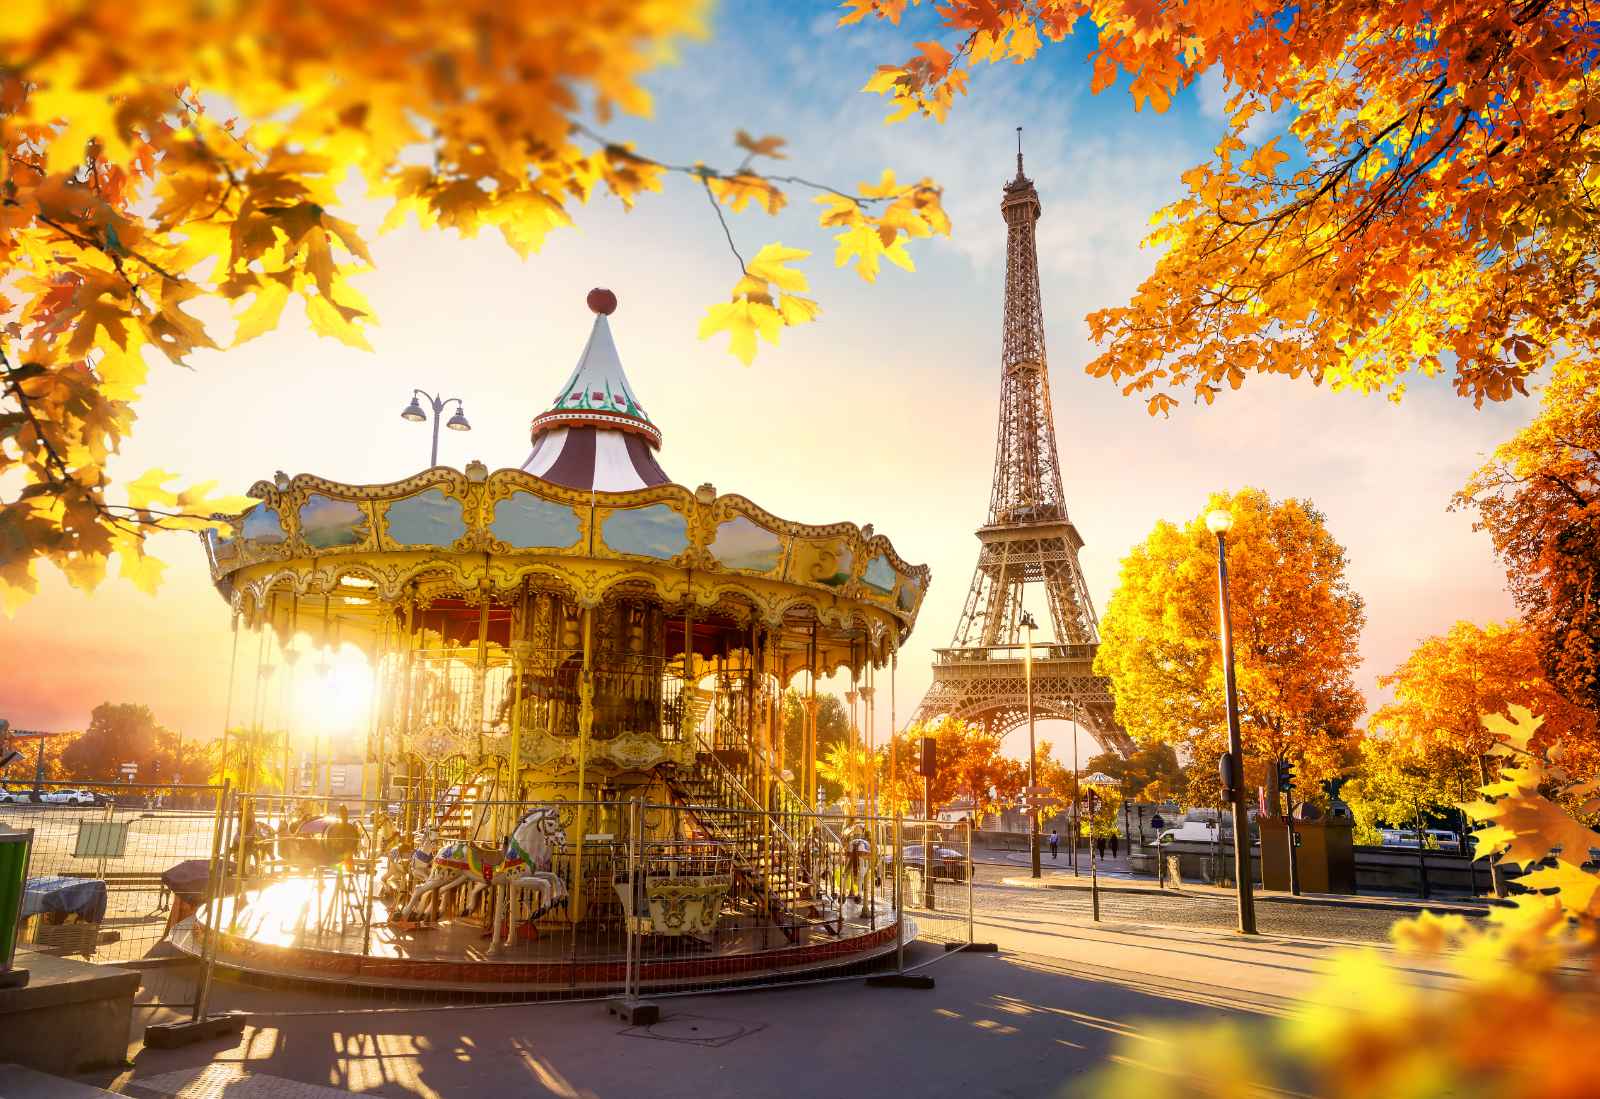 Ultimate One Day in Paris Itinerary – How to See Paris in a Day